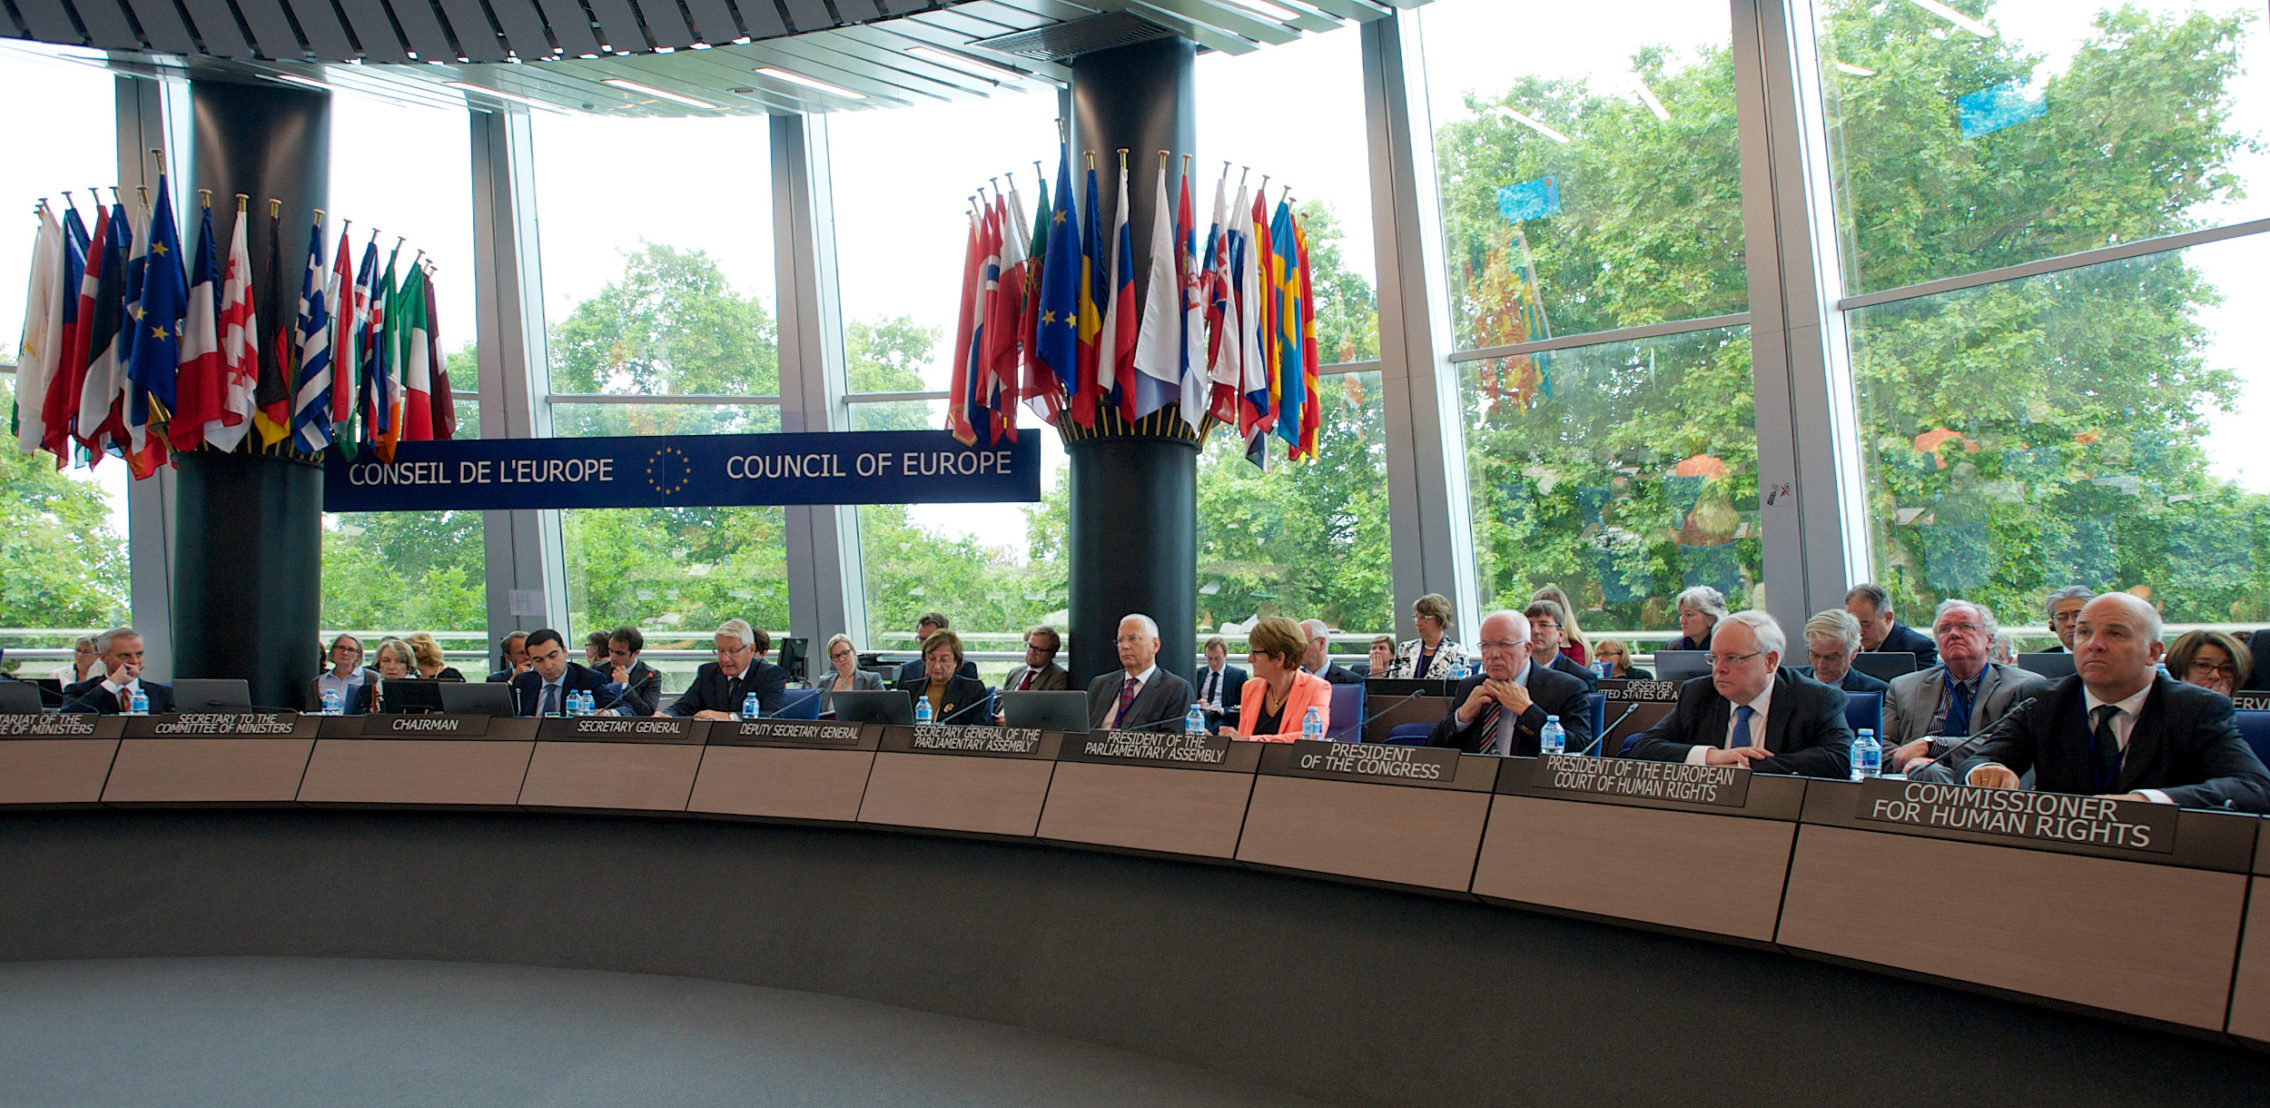 Council of Europe Committee of Ministers seated in panel